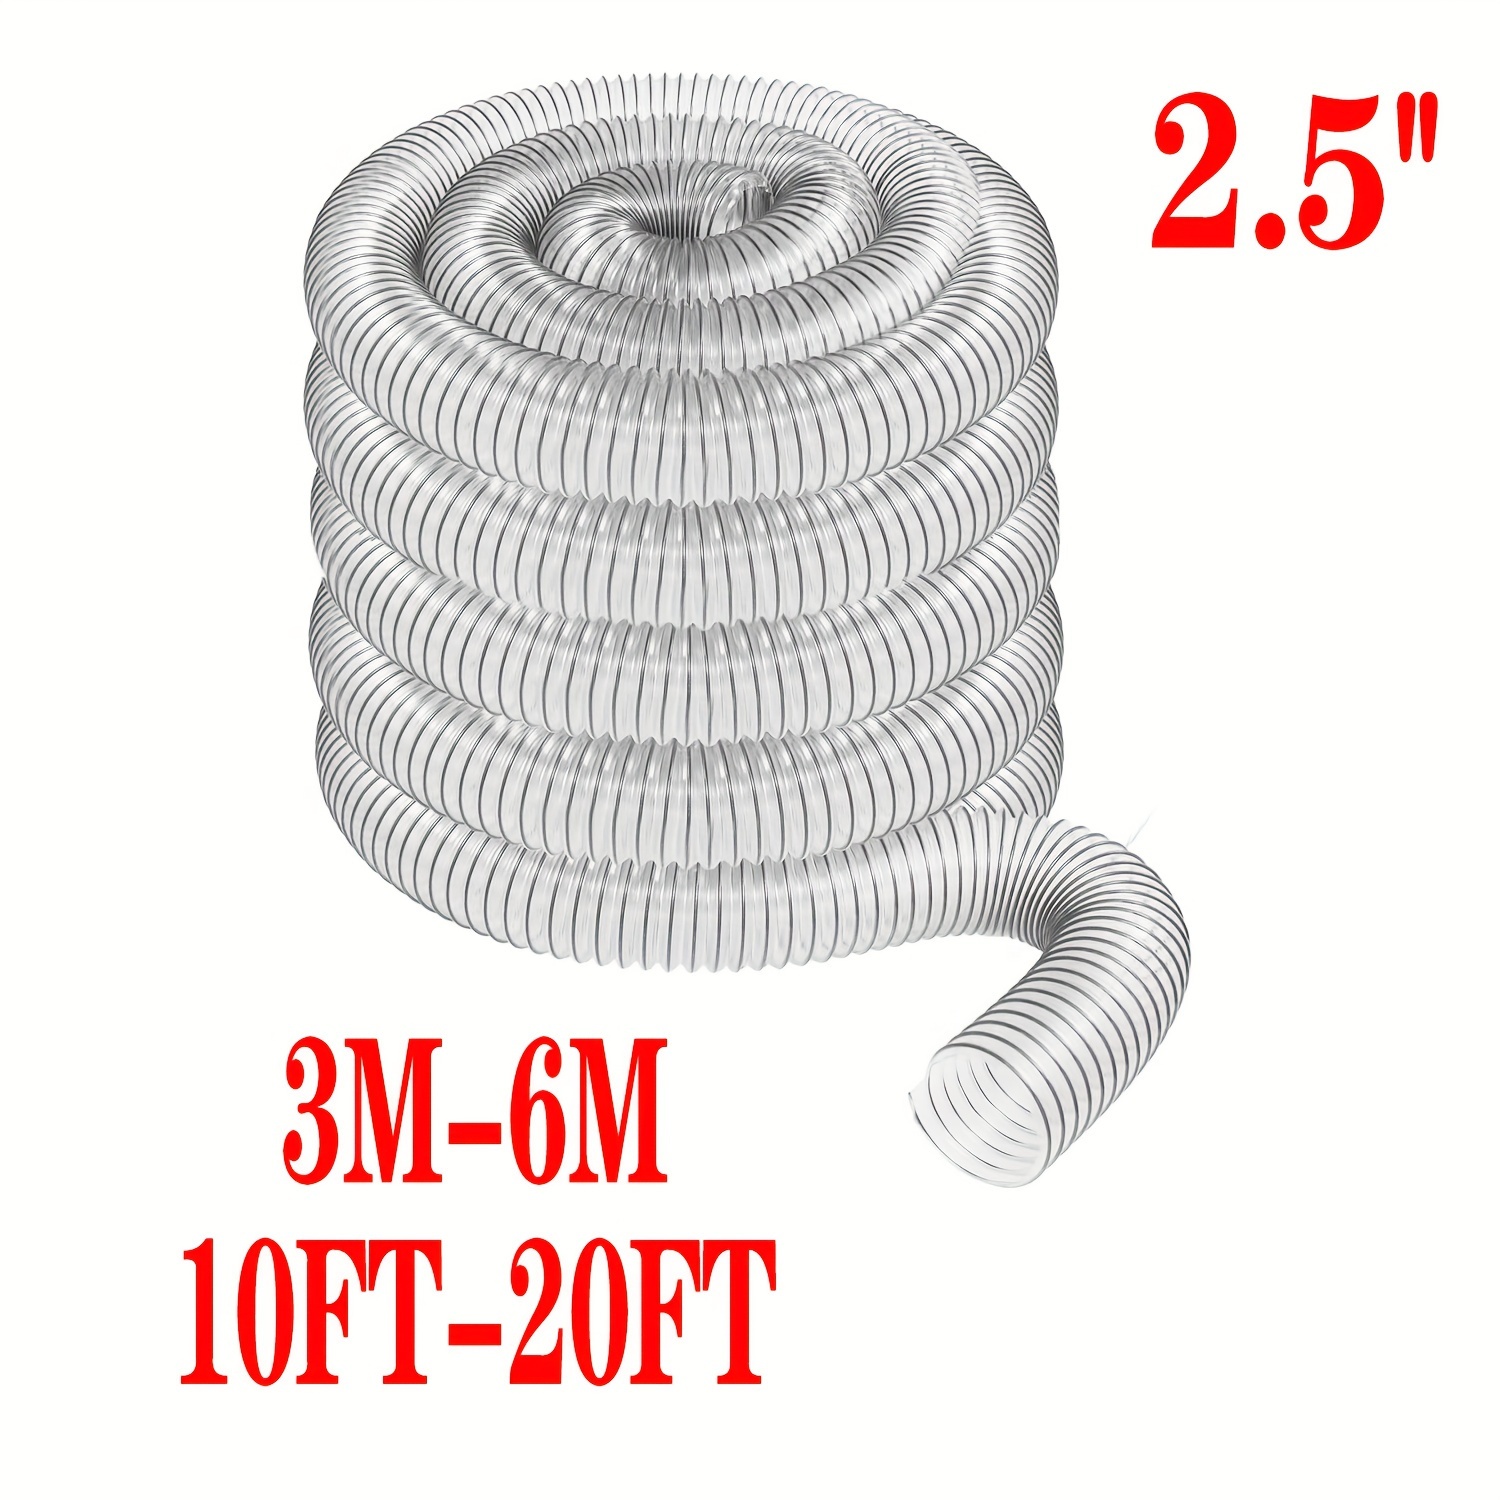 

Od 63mm Clear Pvc Dust Collection Hose For Use With Dust Collectors With 2-1/2" Ports. Ideal For Shop Vacuums